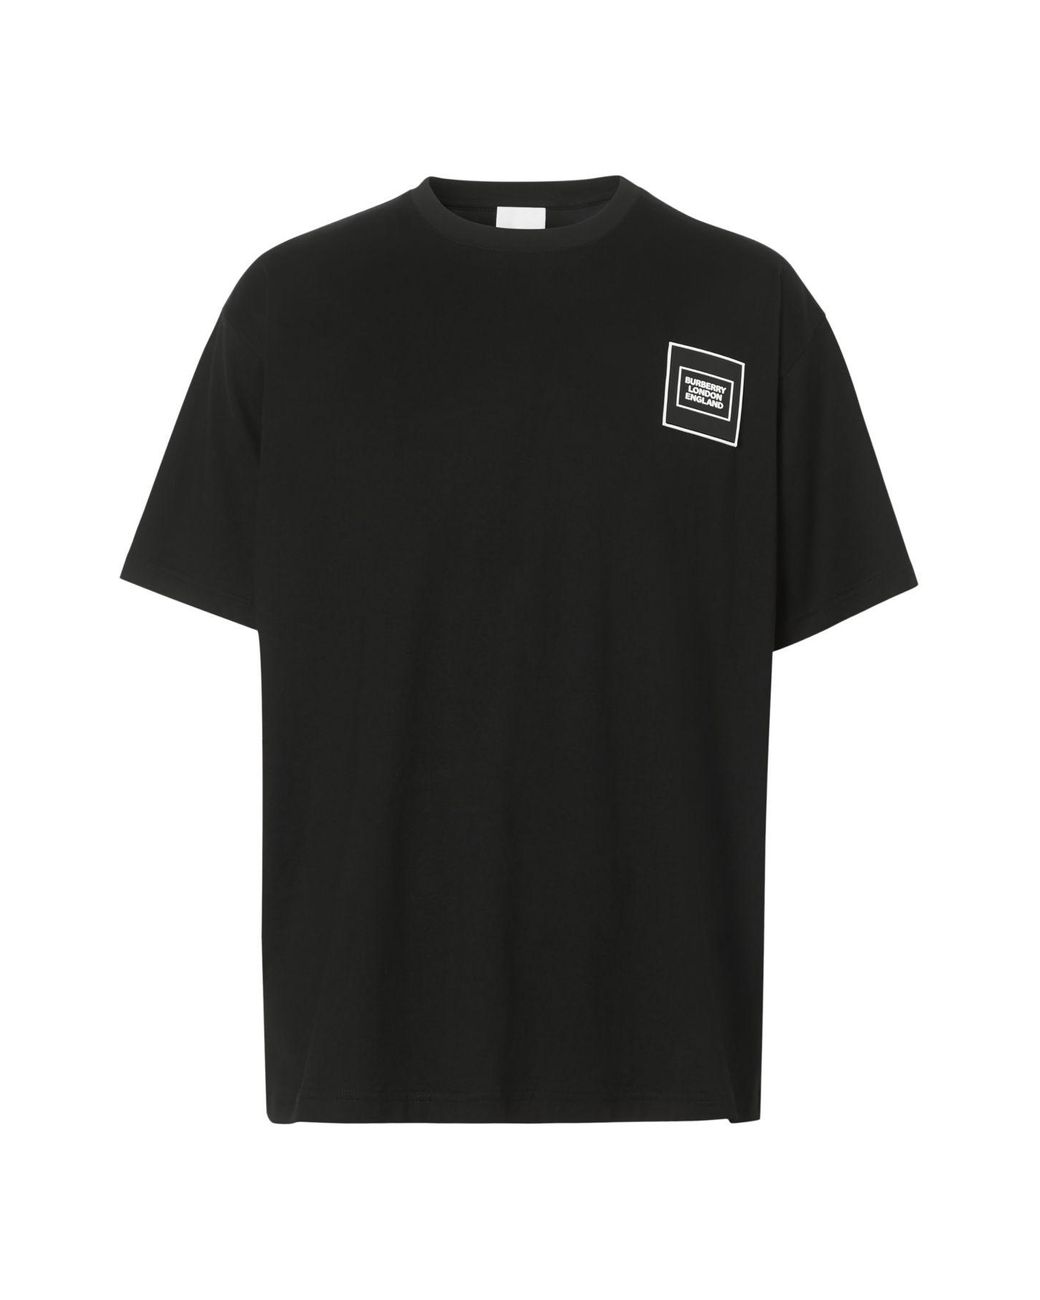 Burberry Cotton Logo Patch T-shirt in Black for Men - Lyst